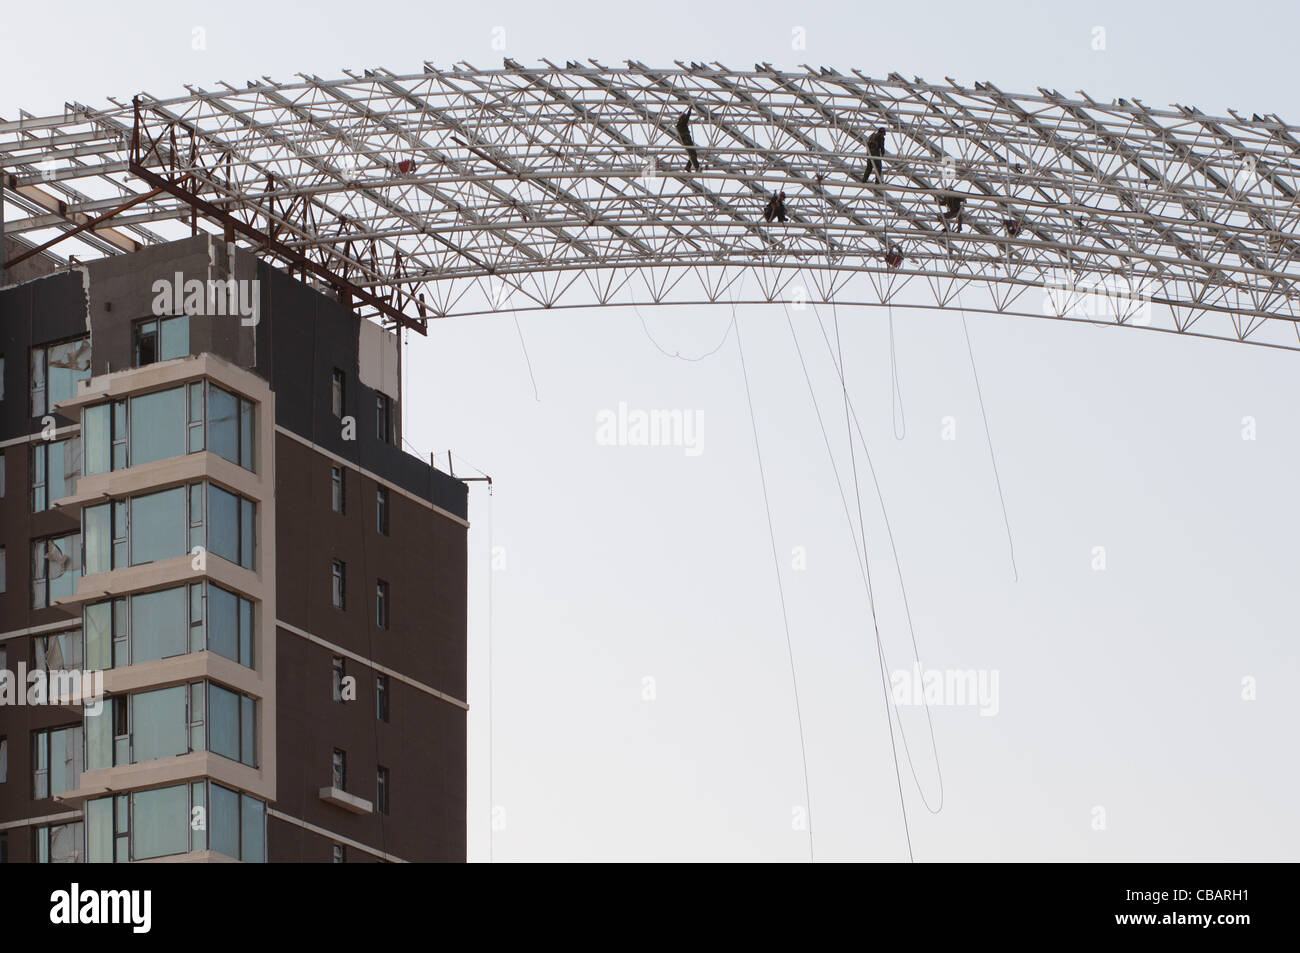 Workers on the roof of a building under construction. Dezhou, Shandong, China Stock Photo